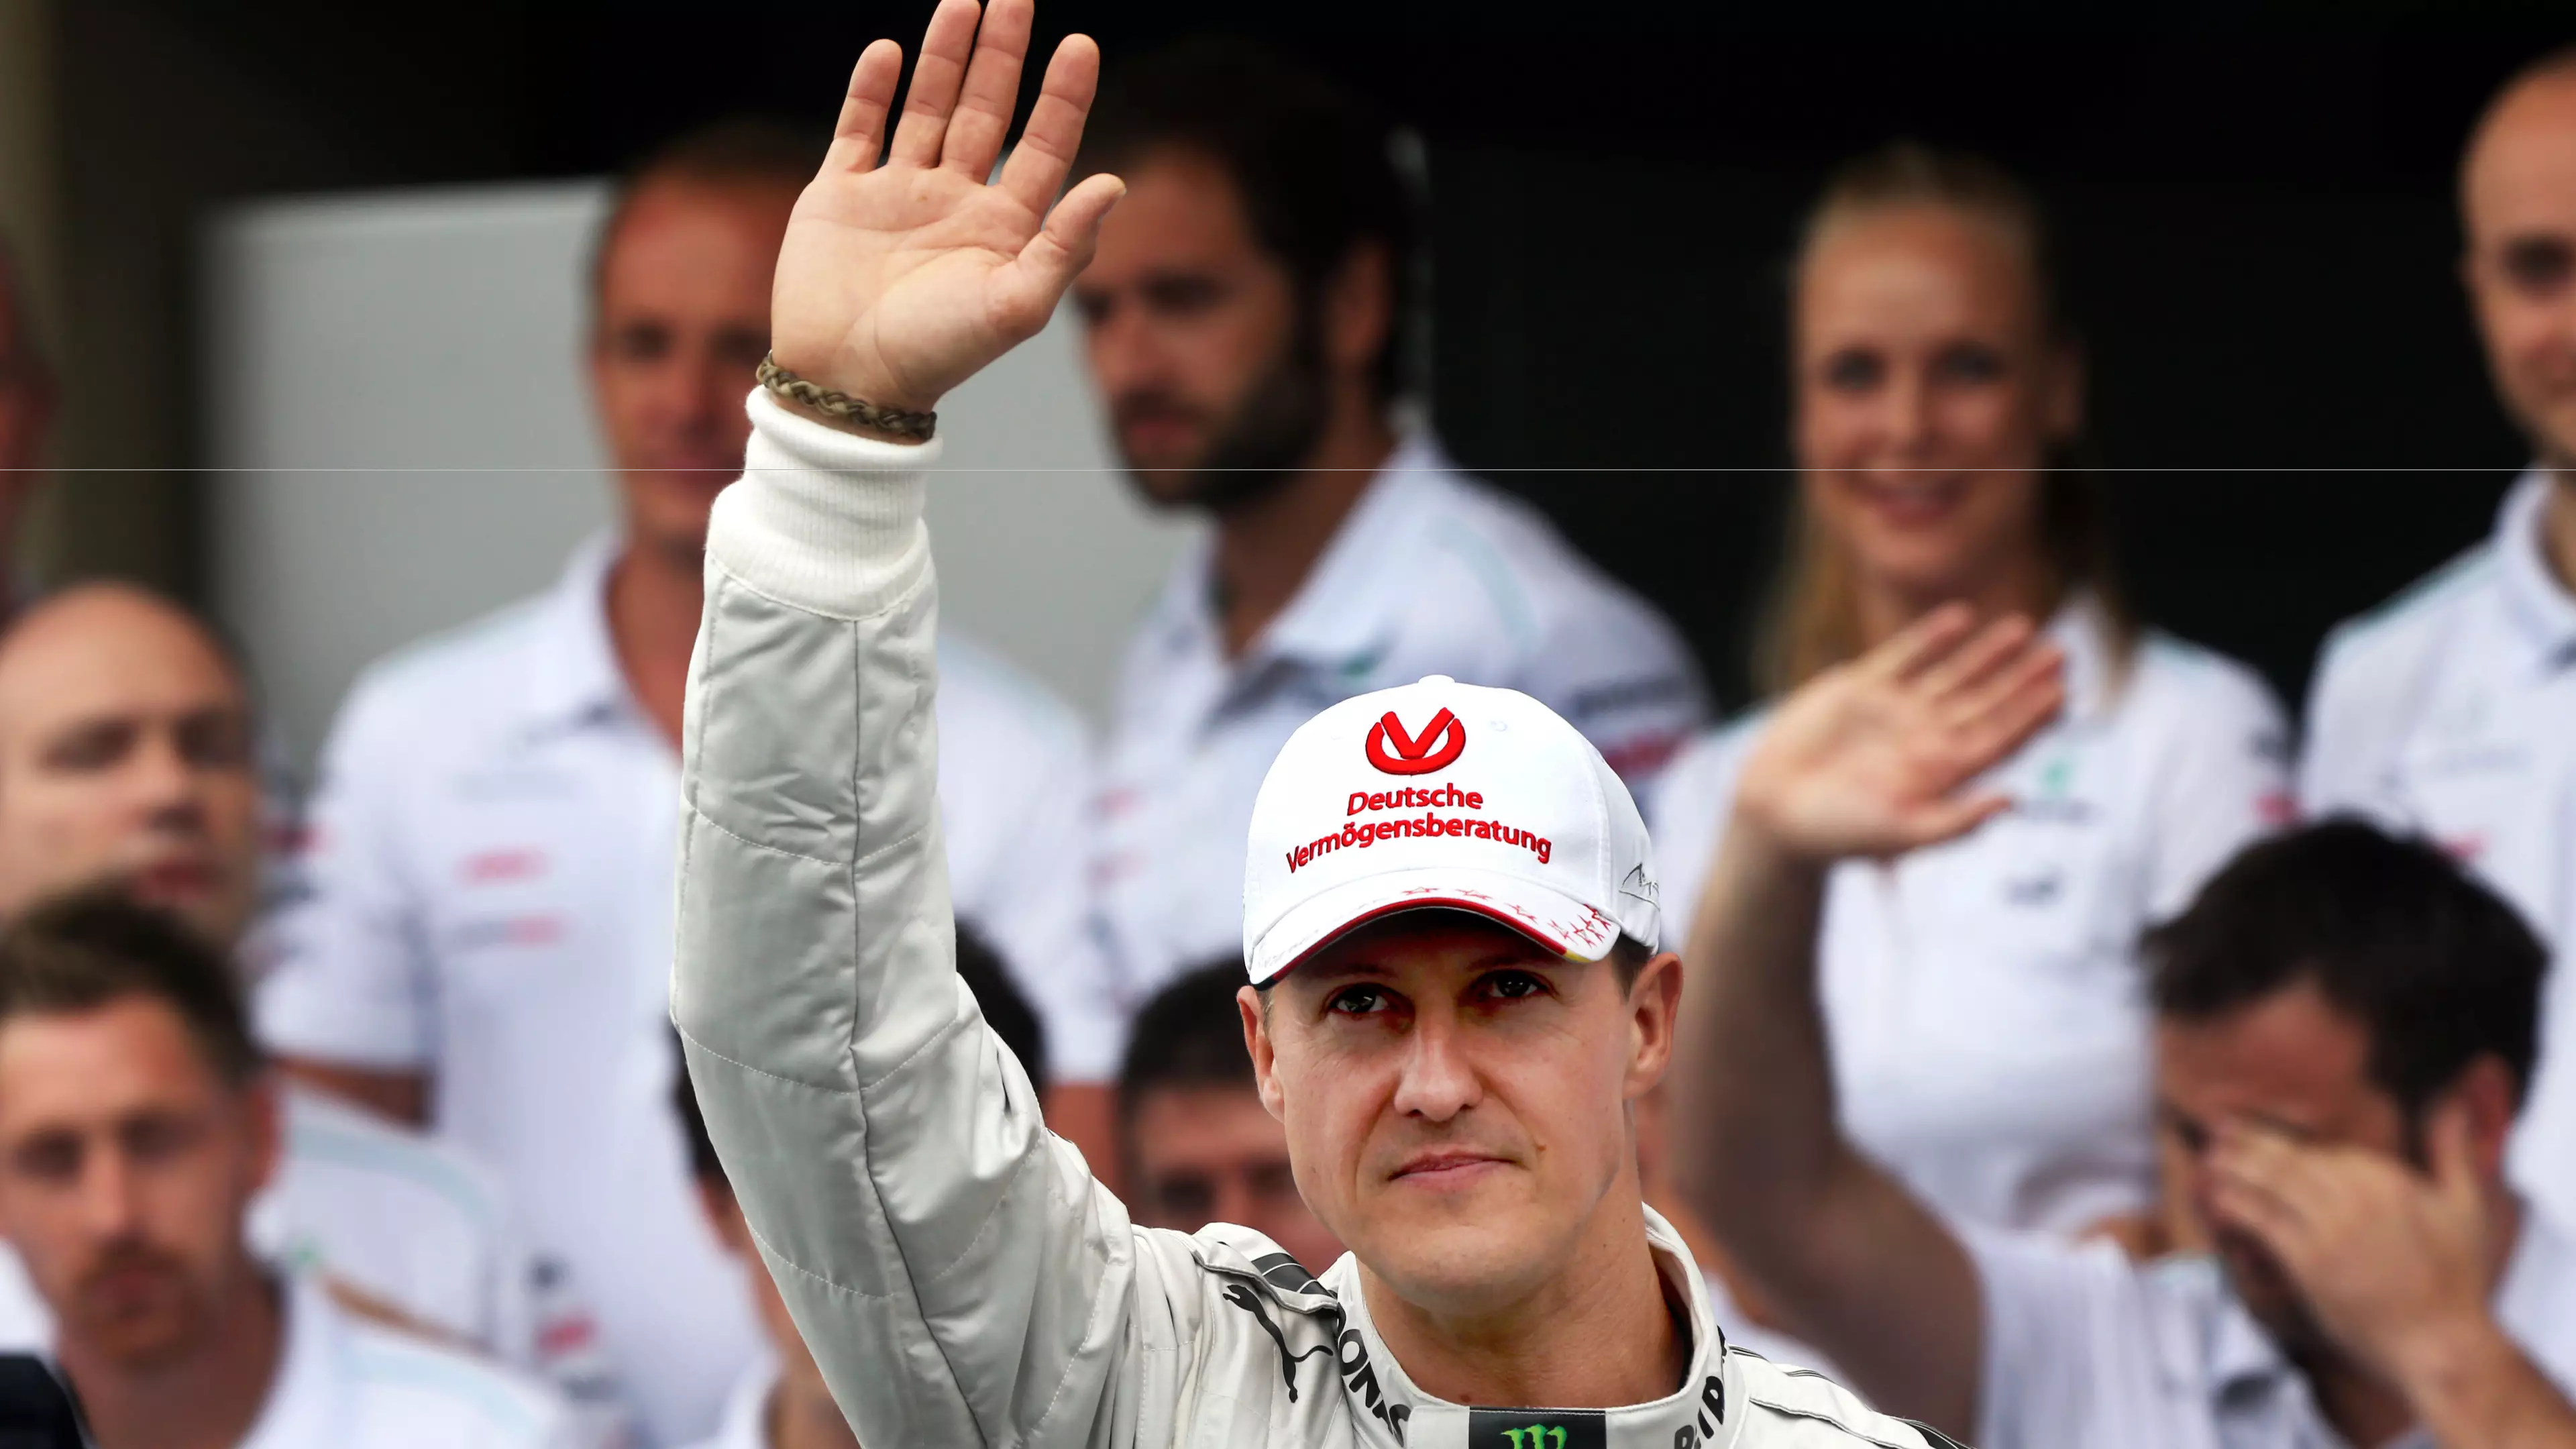 Michael Schumacher To Be Honoured In Second Charity Football Match